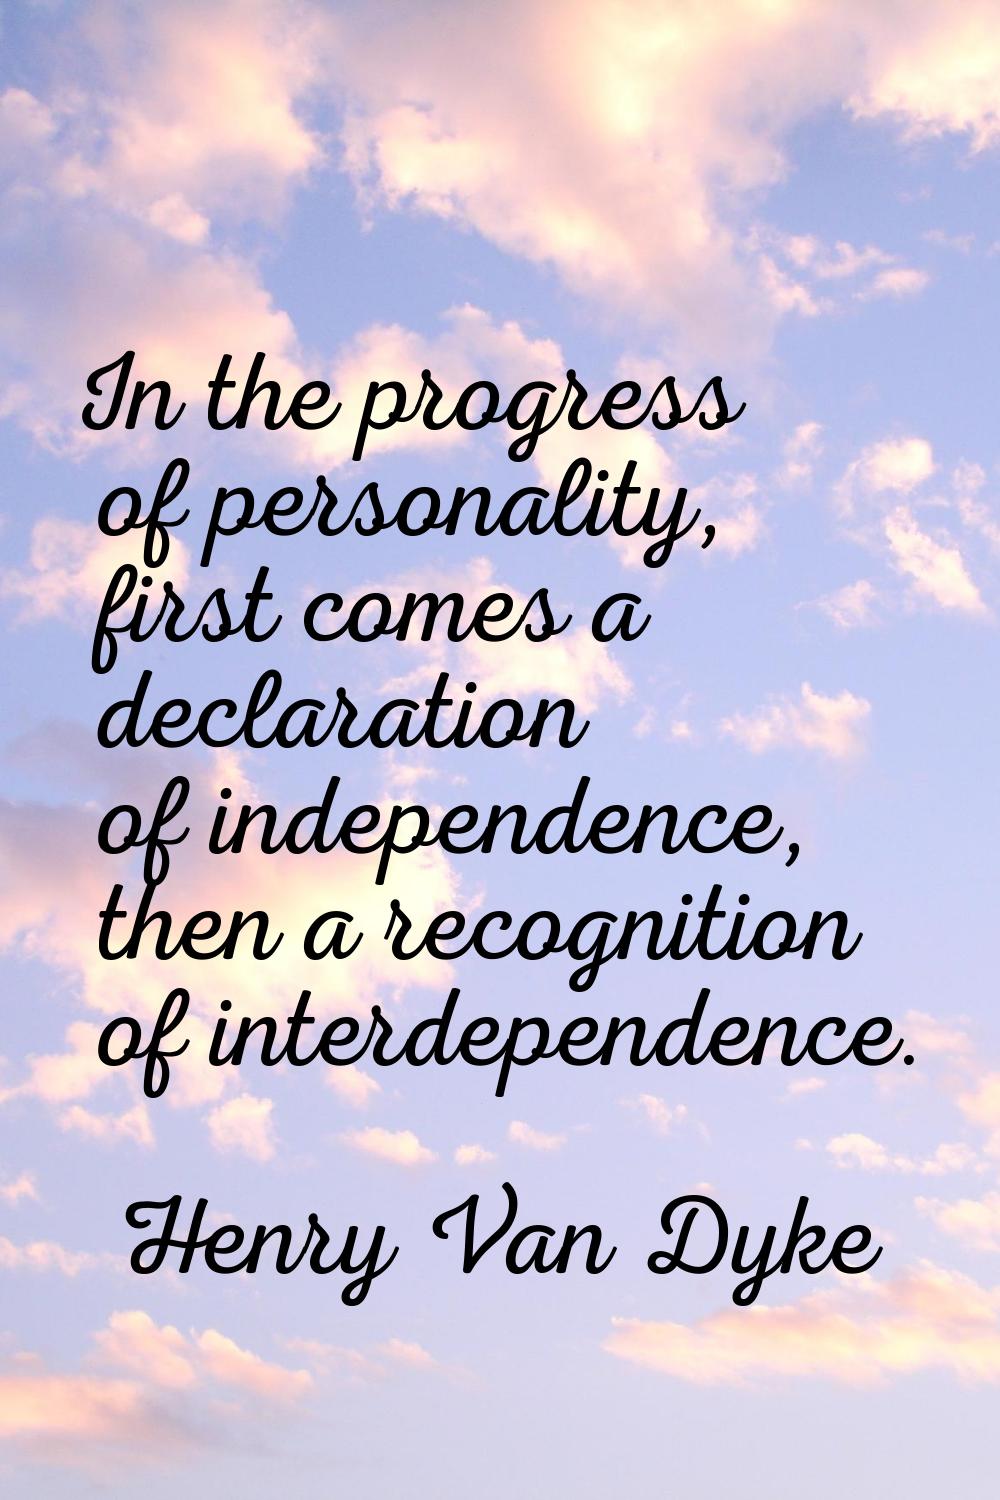 In the progress of personality, first comes a declaration of independence, then a recognition of in